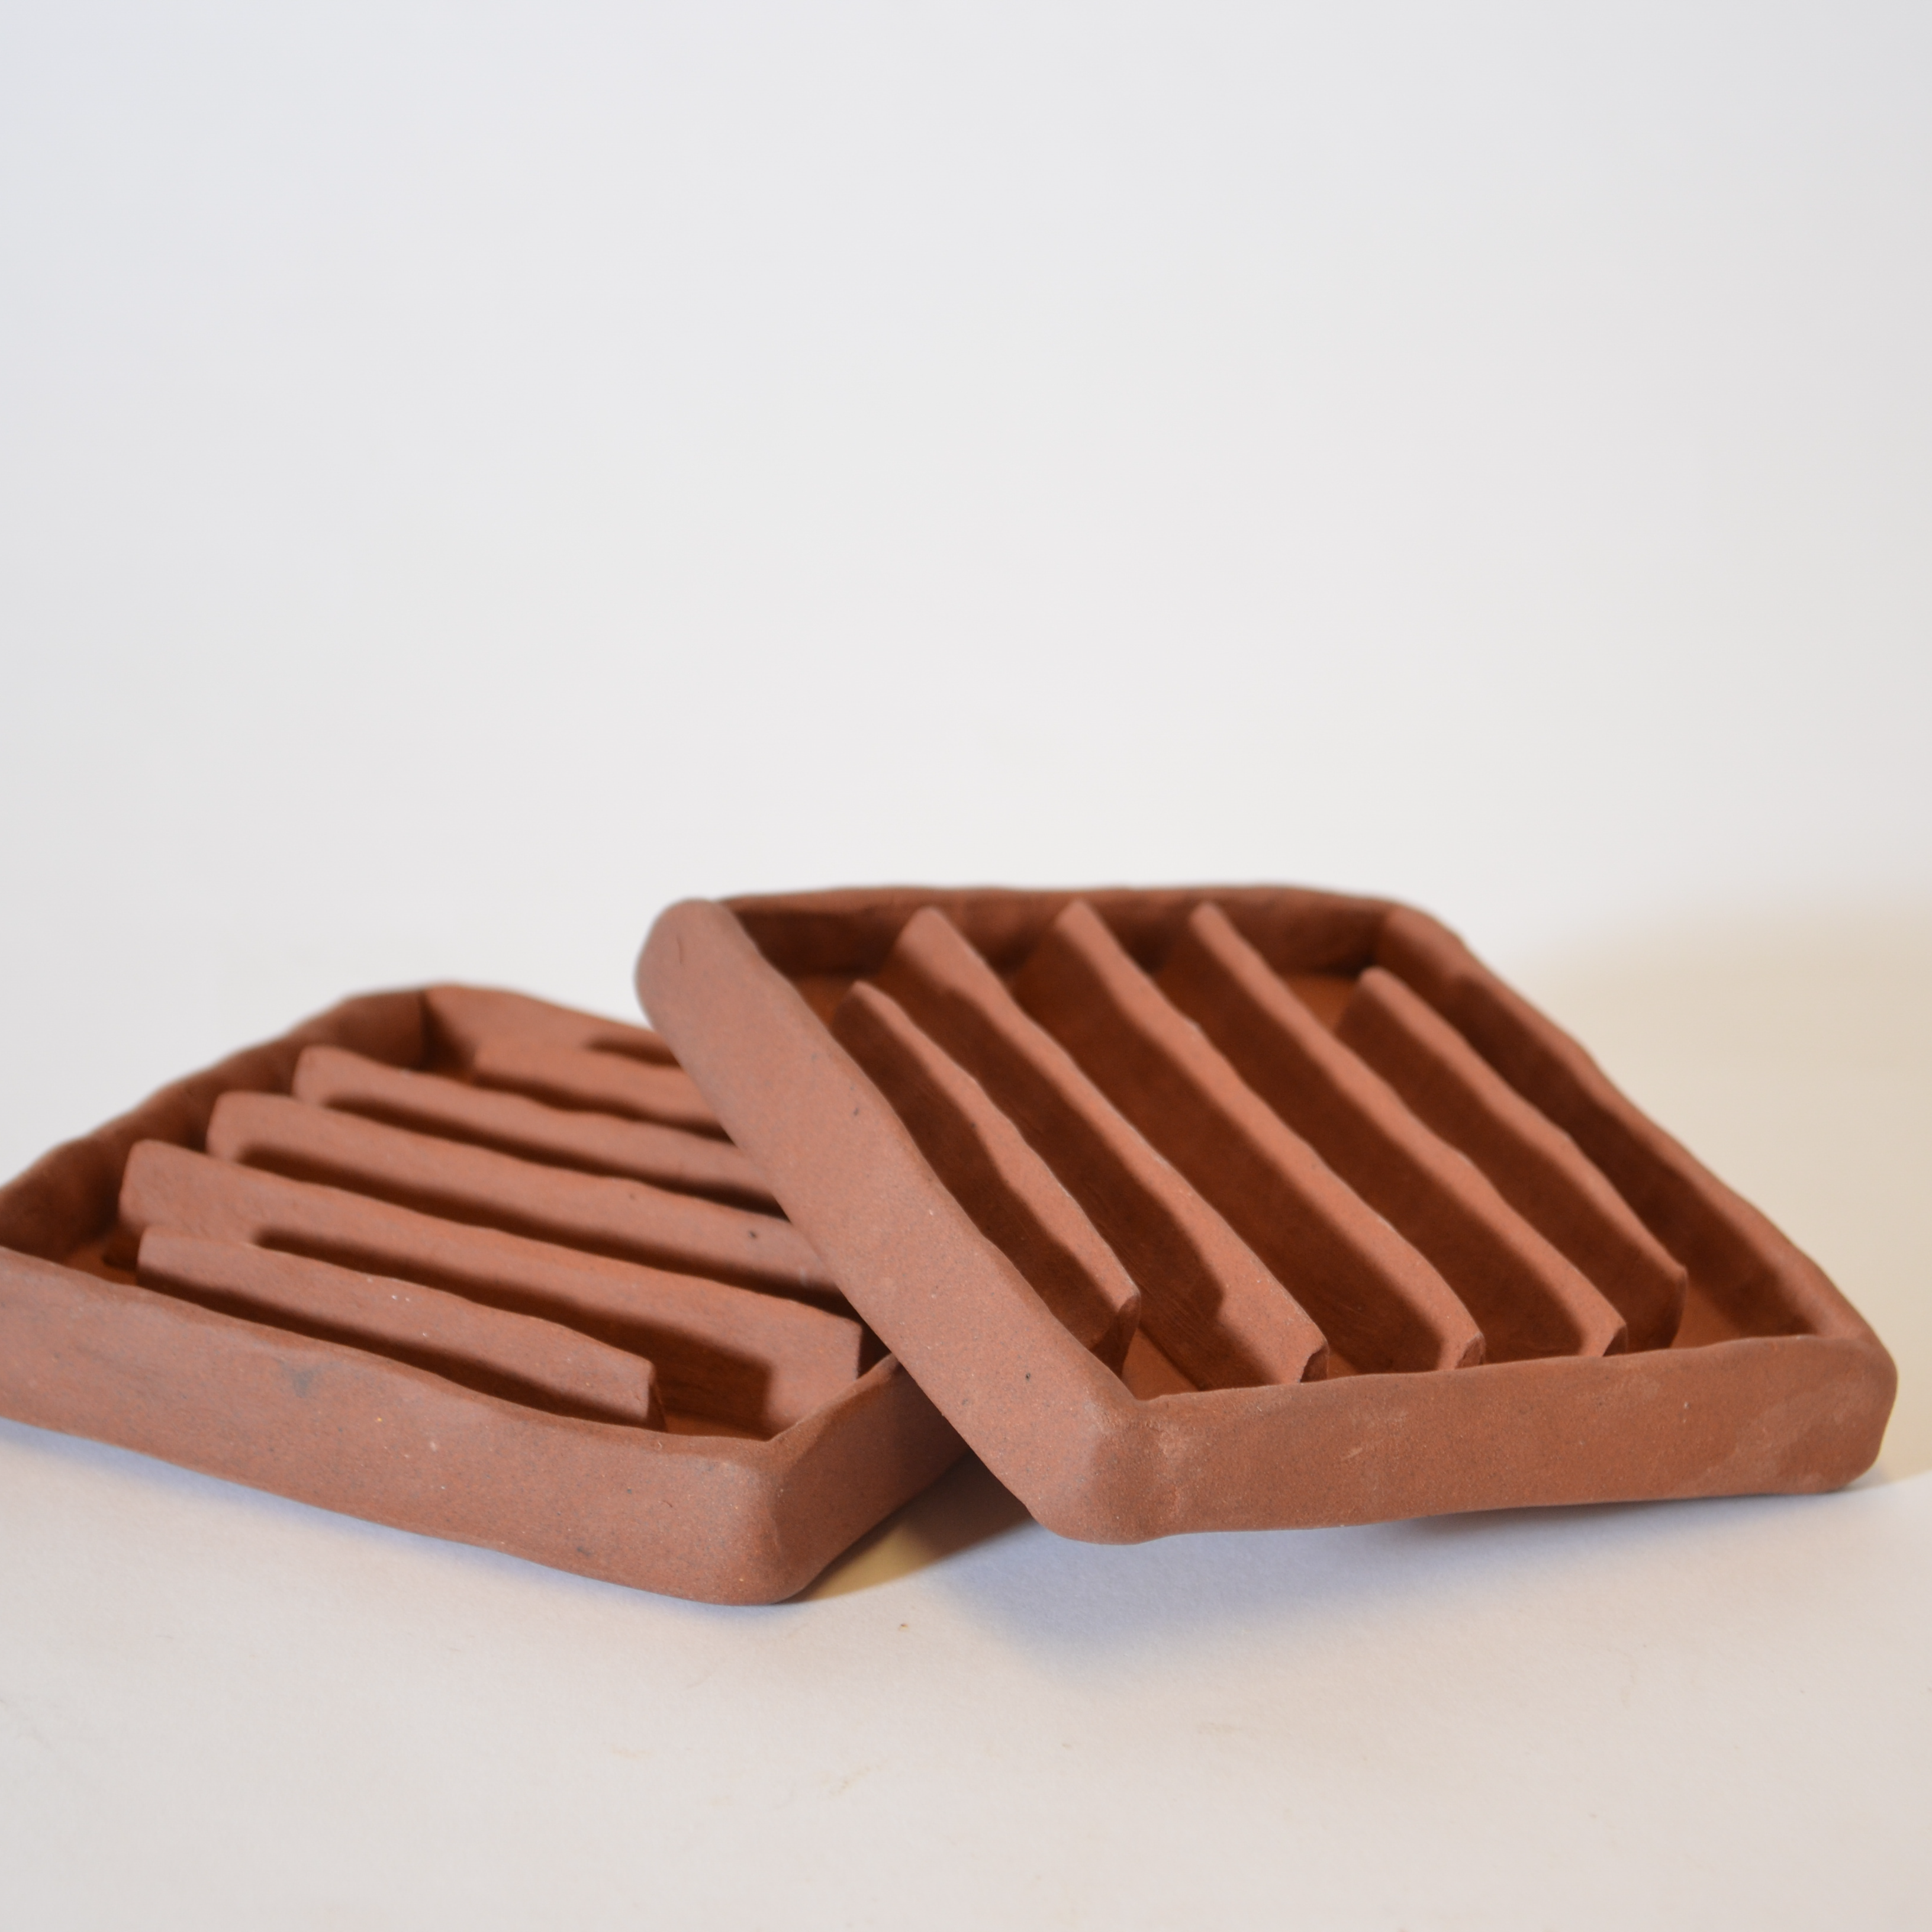 Square Red Clay Soap Dish